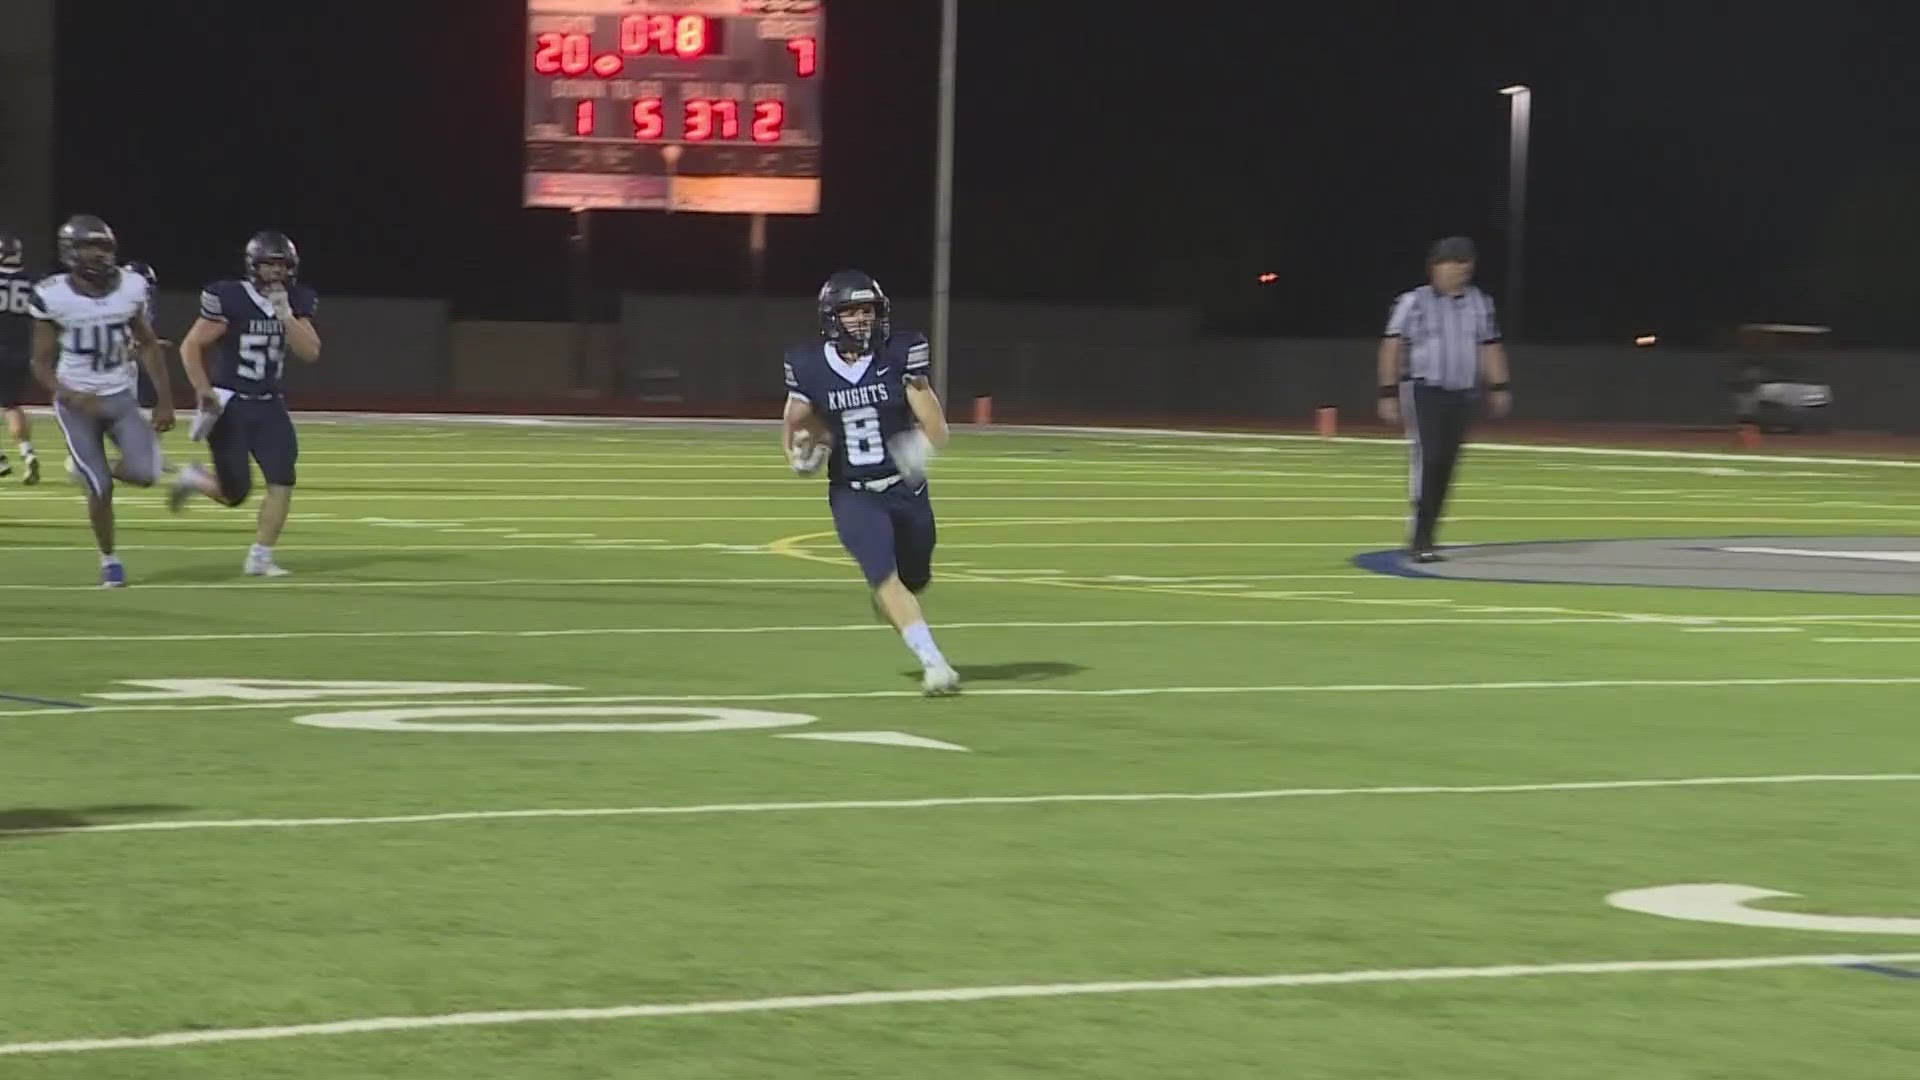 The Higley Knights bounced back from a loss last week to beat Cactus Shadows, 47-27